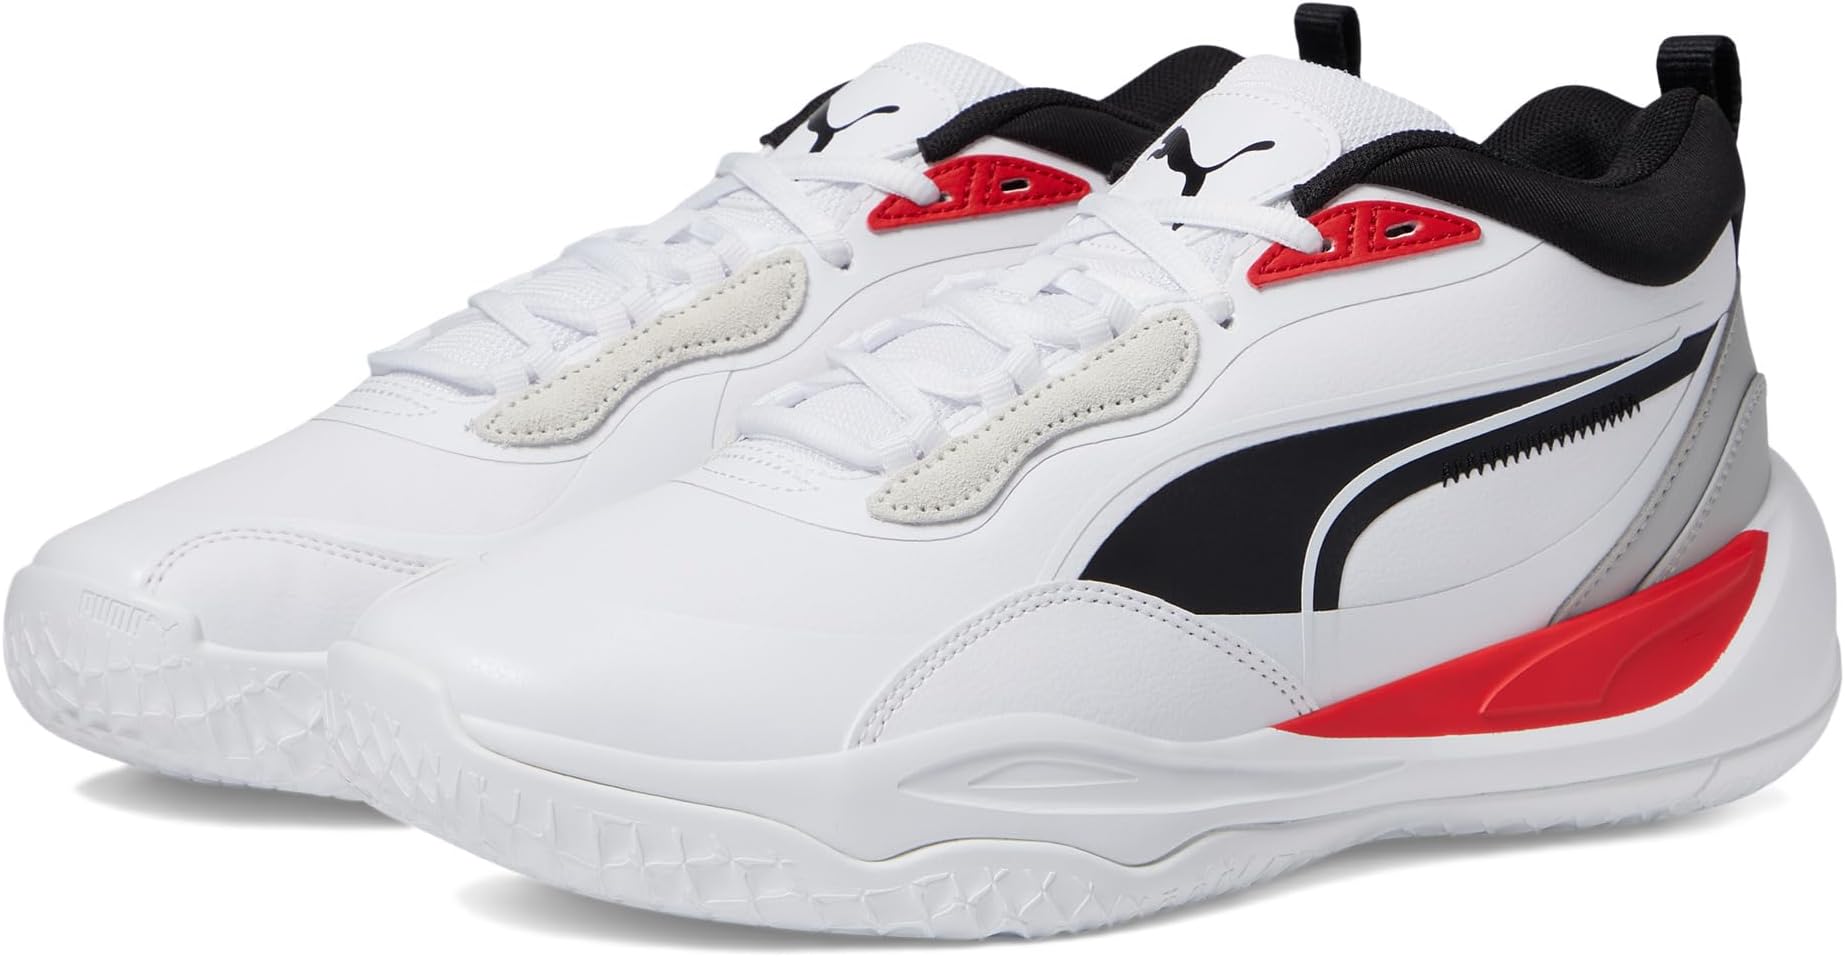 Кроссовки Playmaker Pro Plus PUMA, цвет PUMA White/For All Time Red